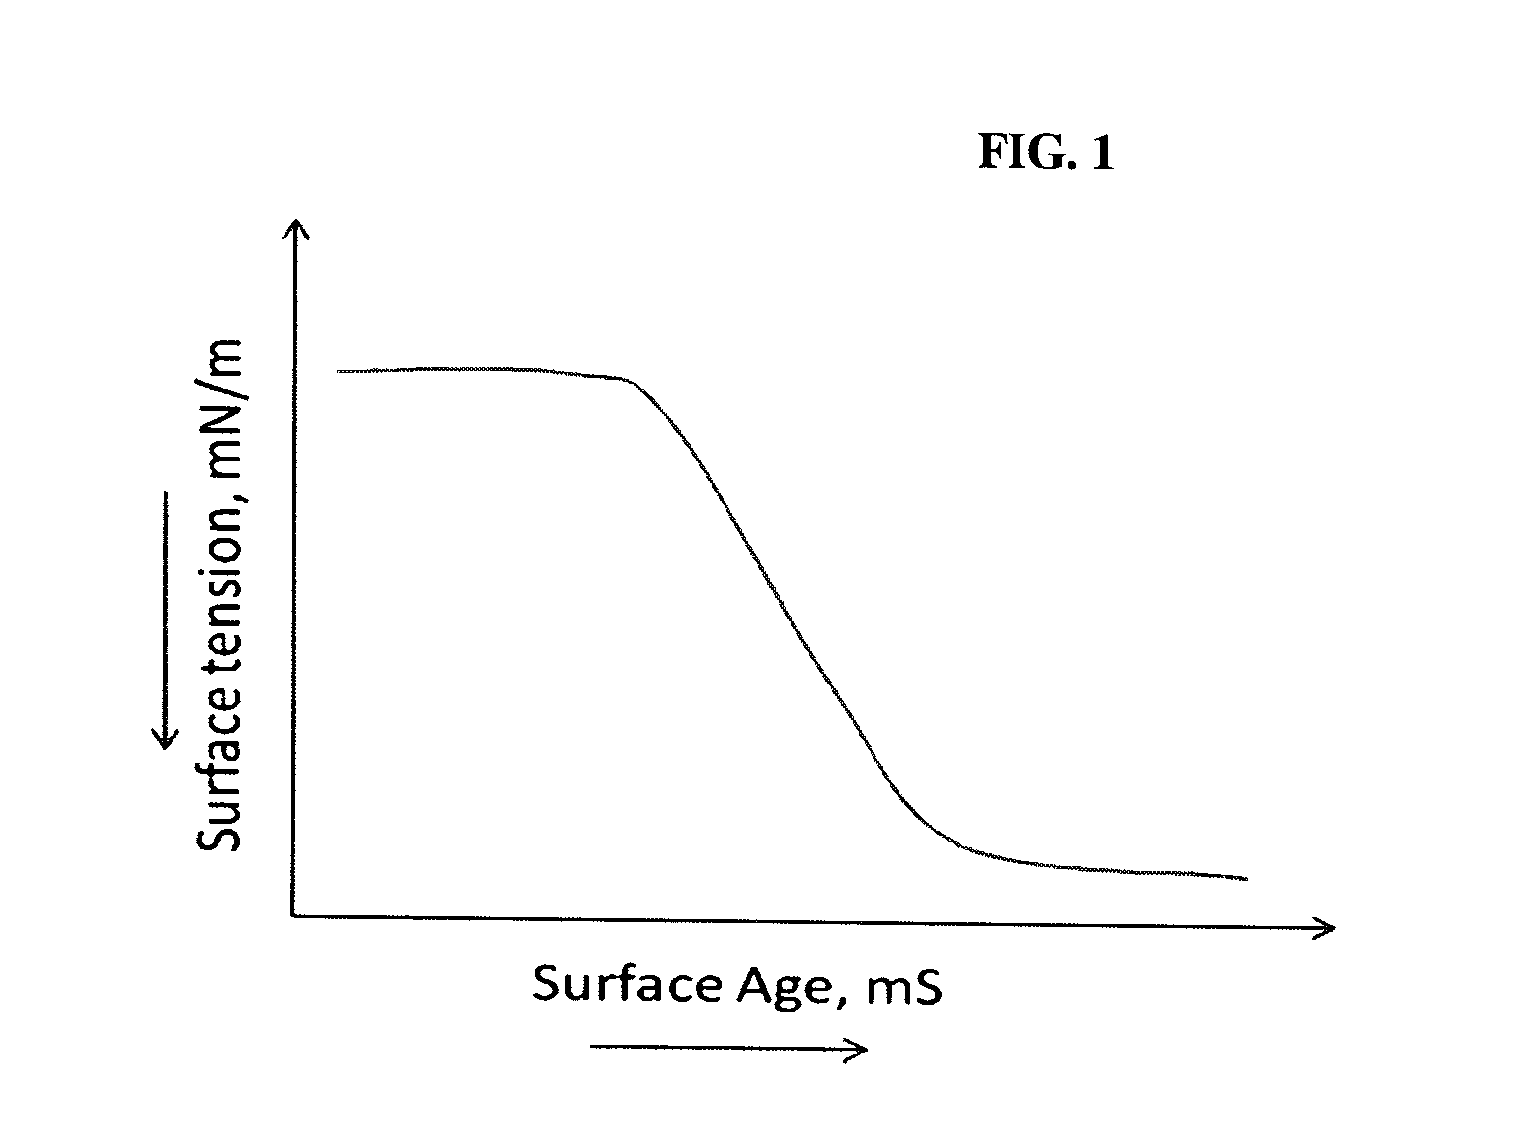 Method for Selection of Surfactants in Well Stimulation